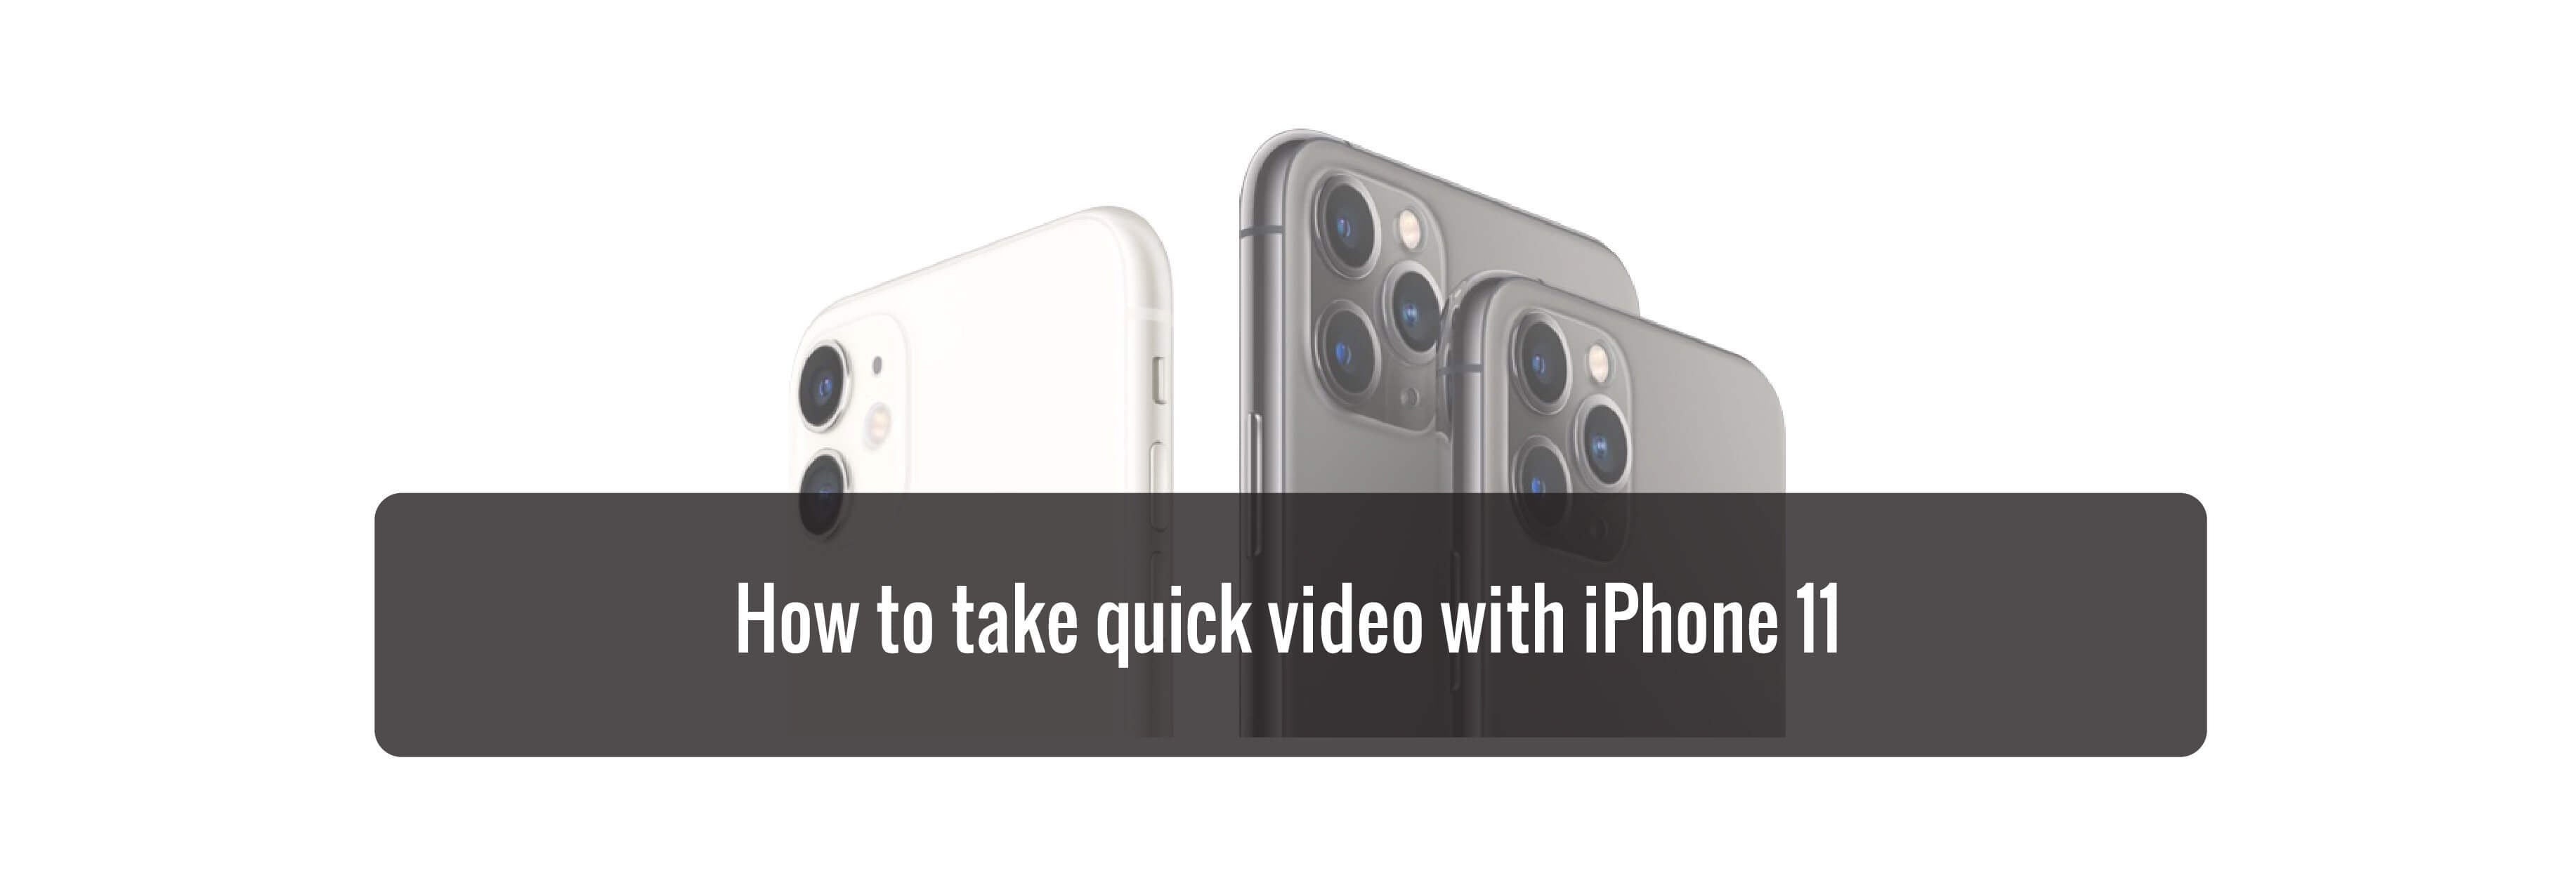 How to take quick video with iPhone 11